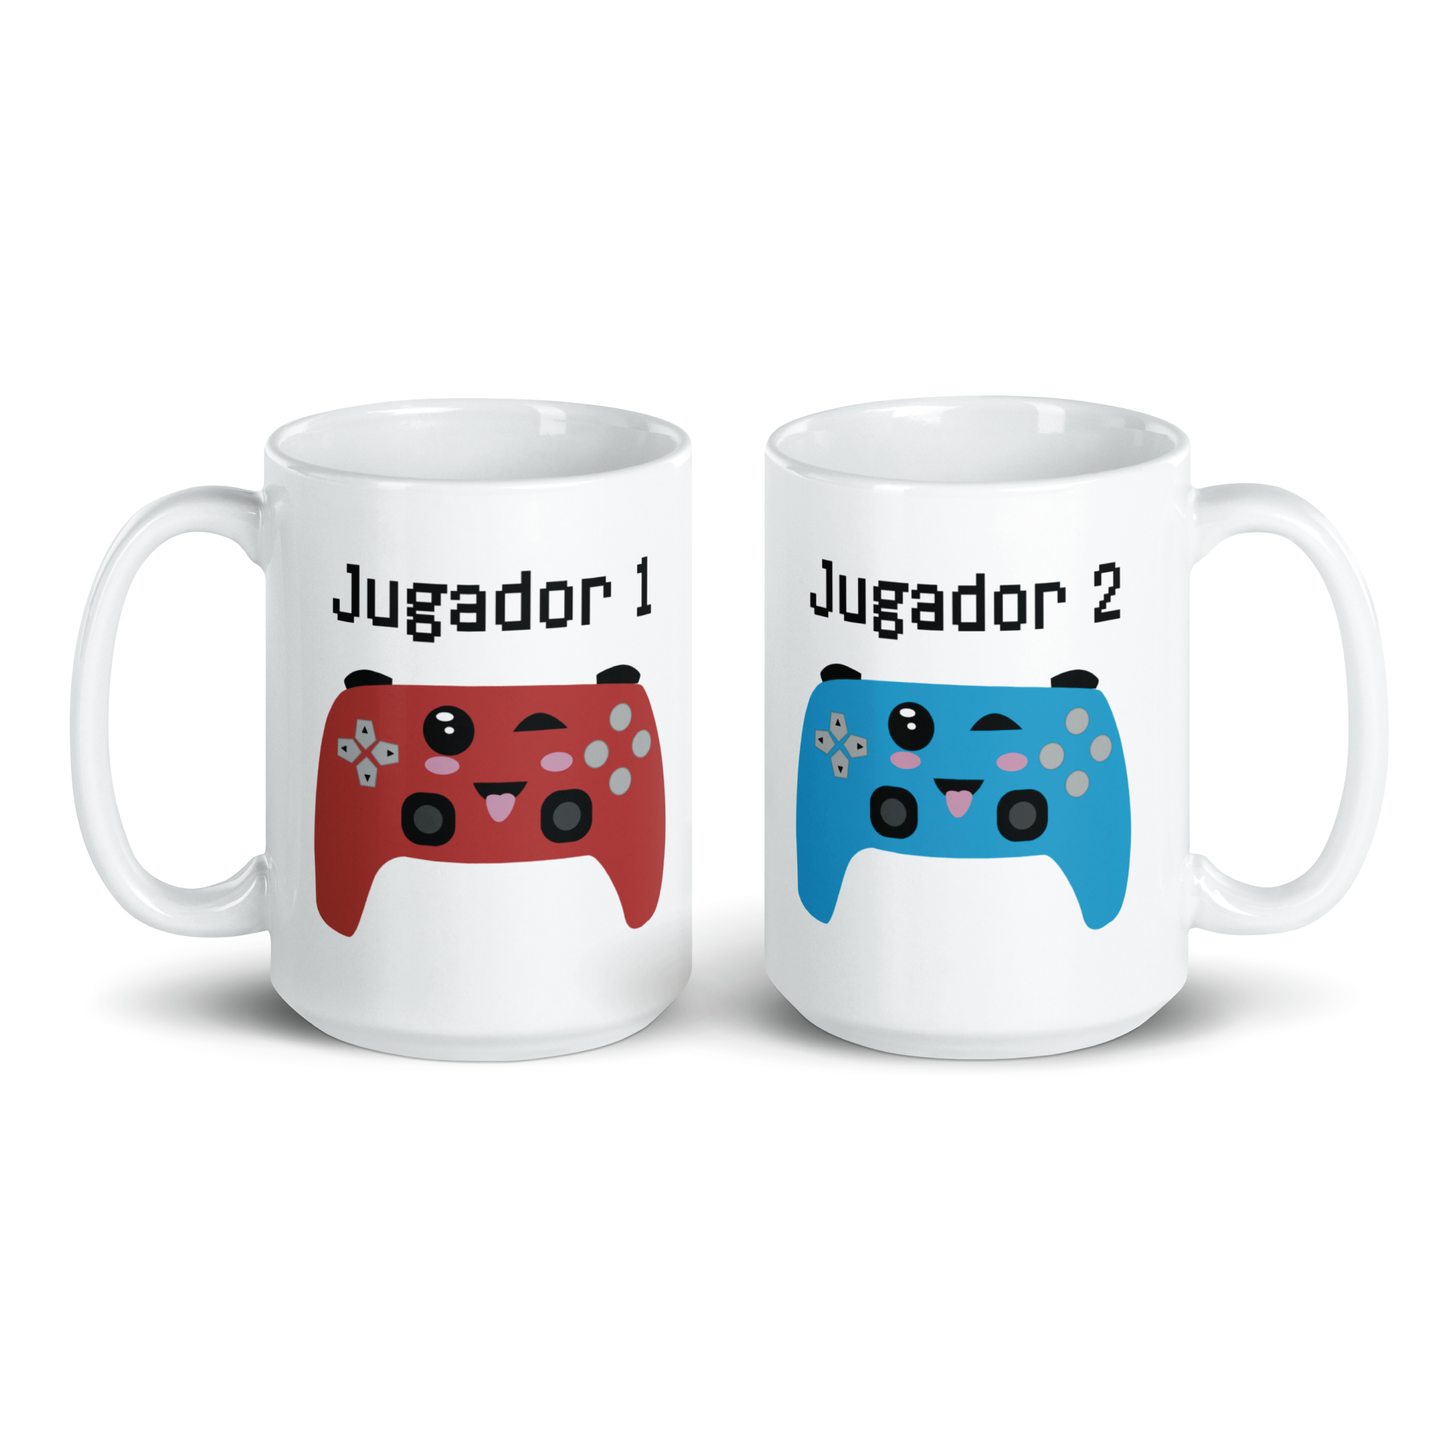 Player 1 and 2 Kit Video Games Mugs 